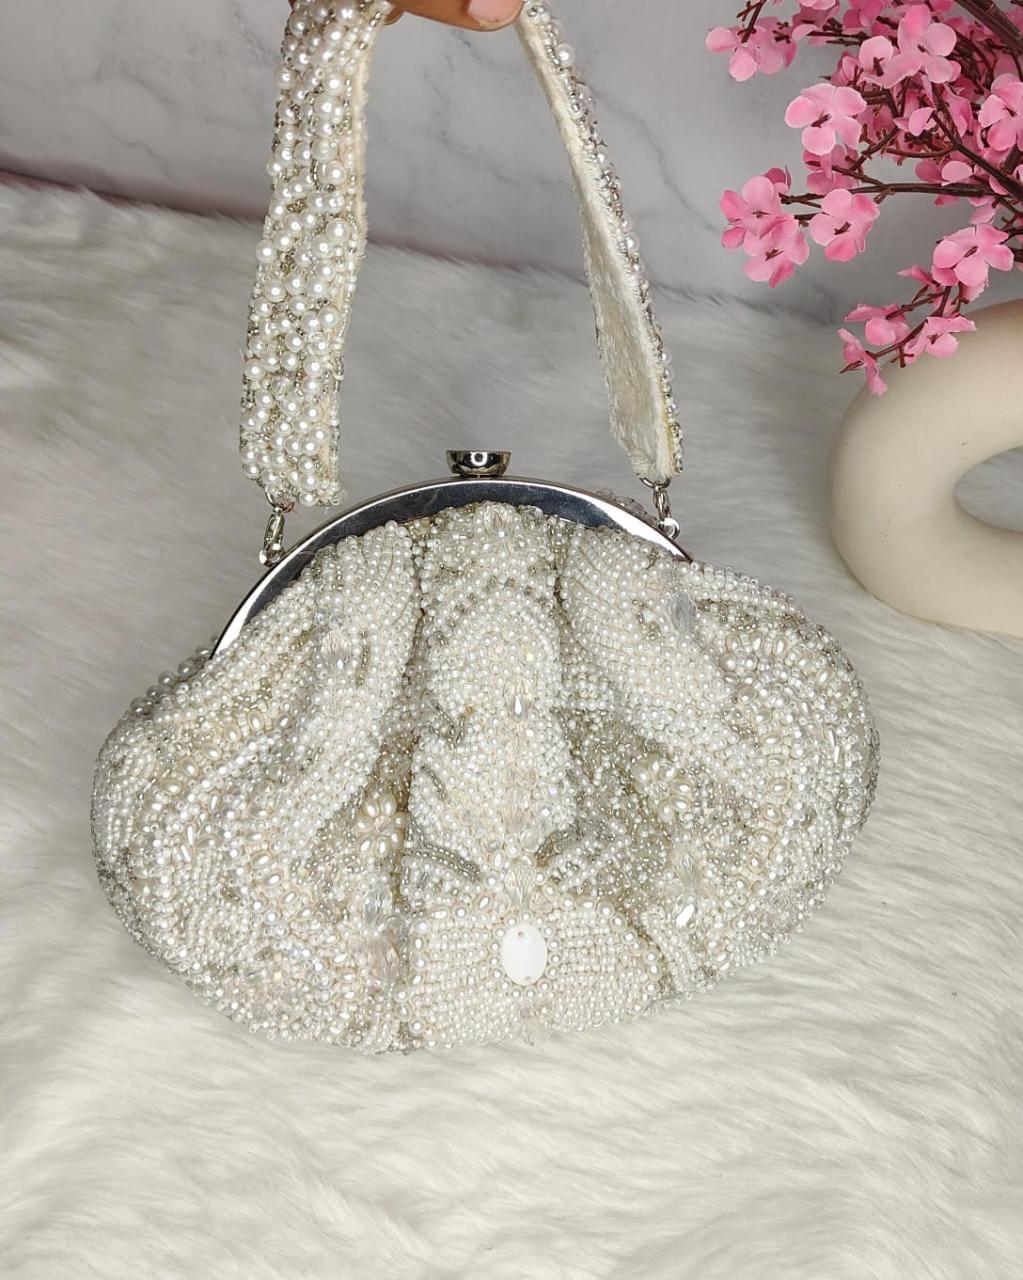 Champagne Hangout Rhinestone Purse In Silver • Impressions Online Boutique